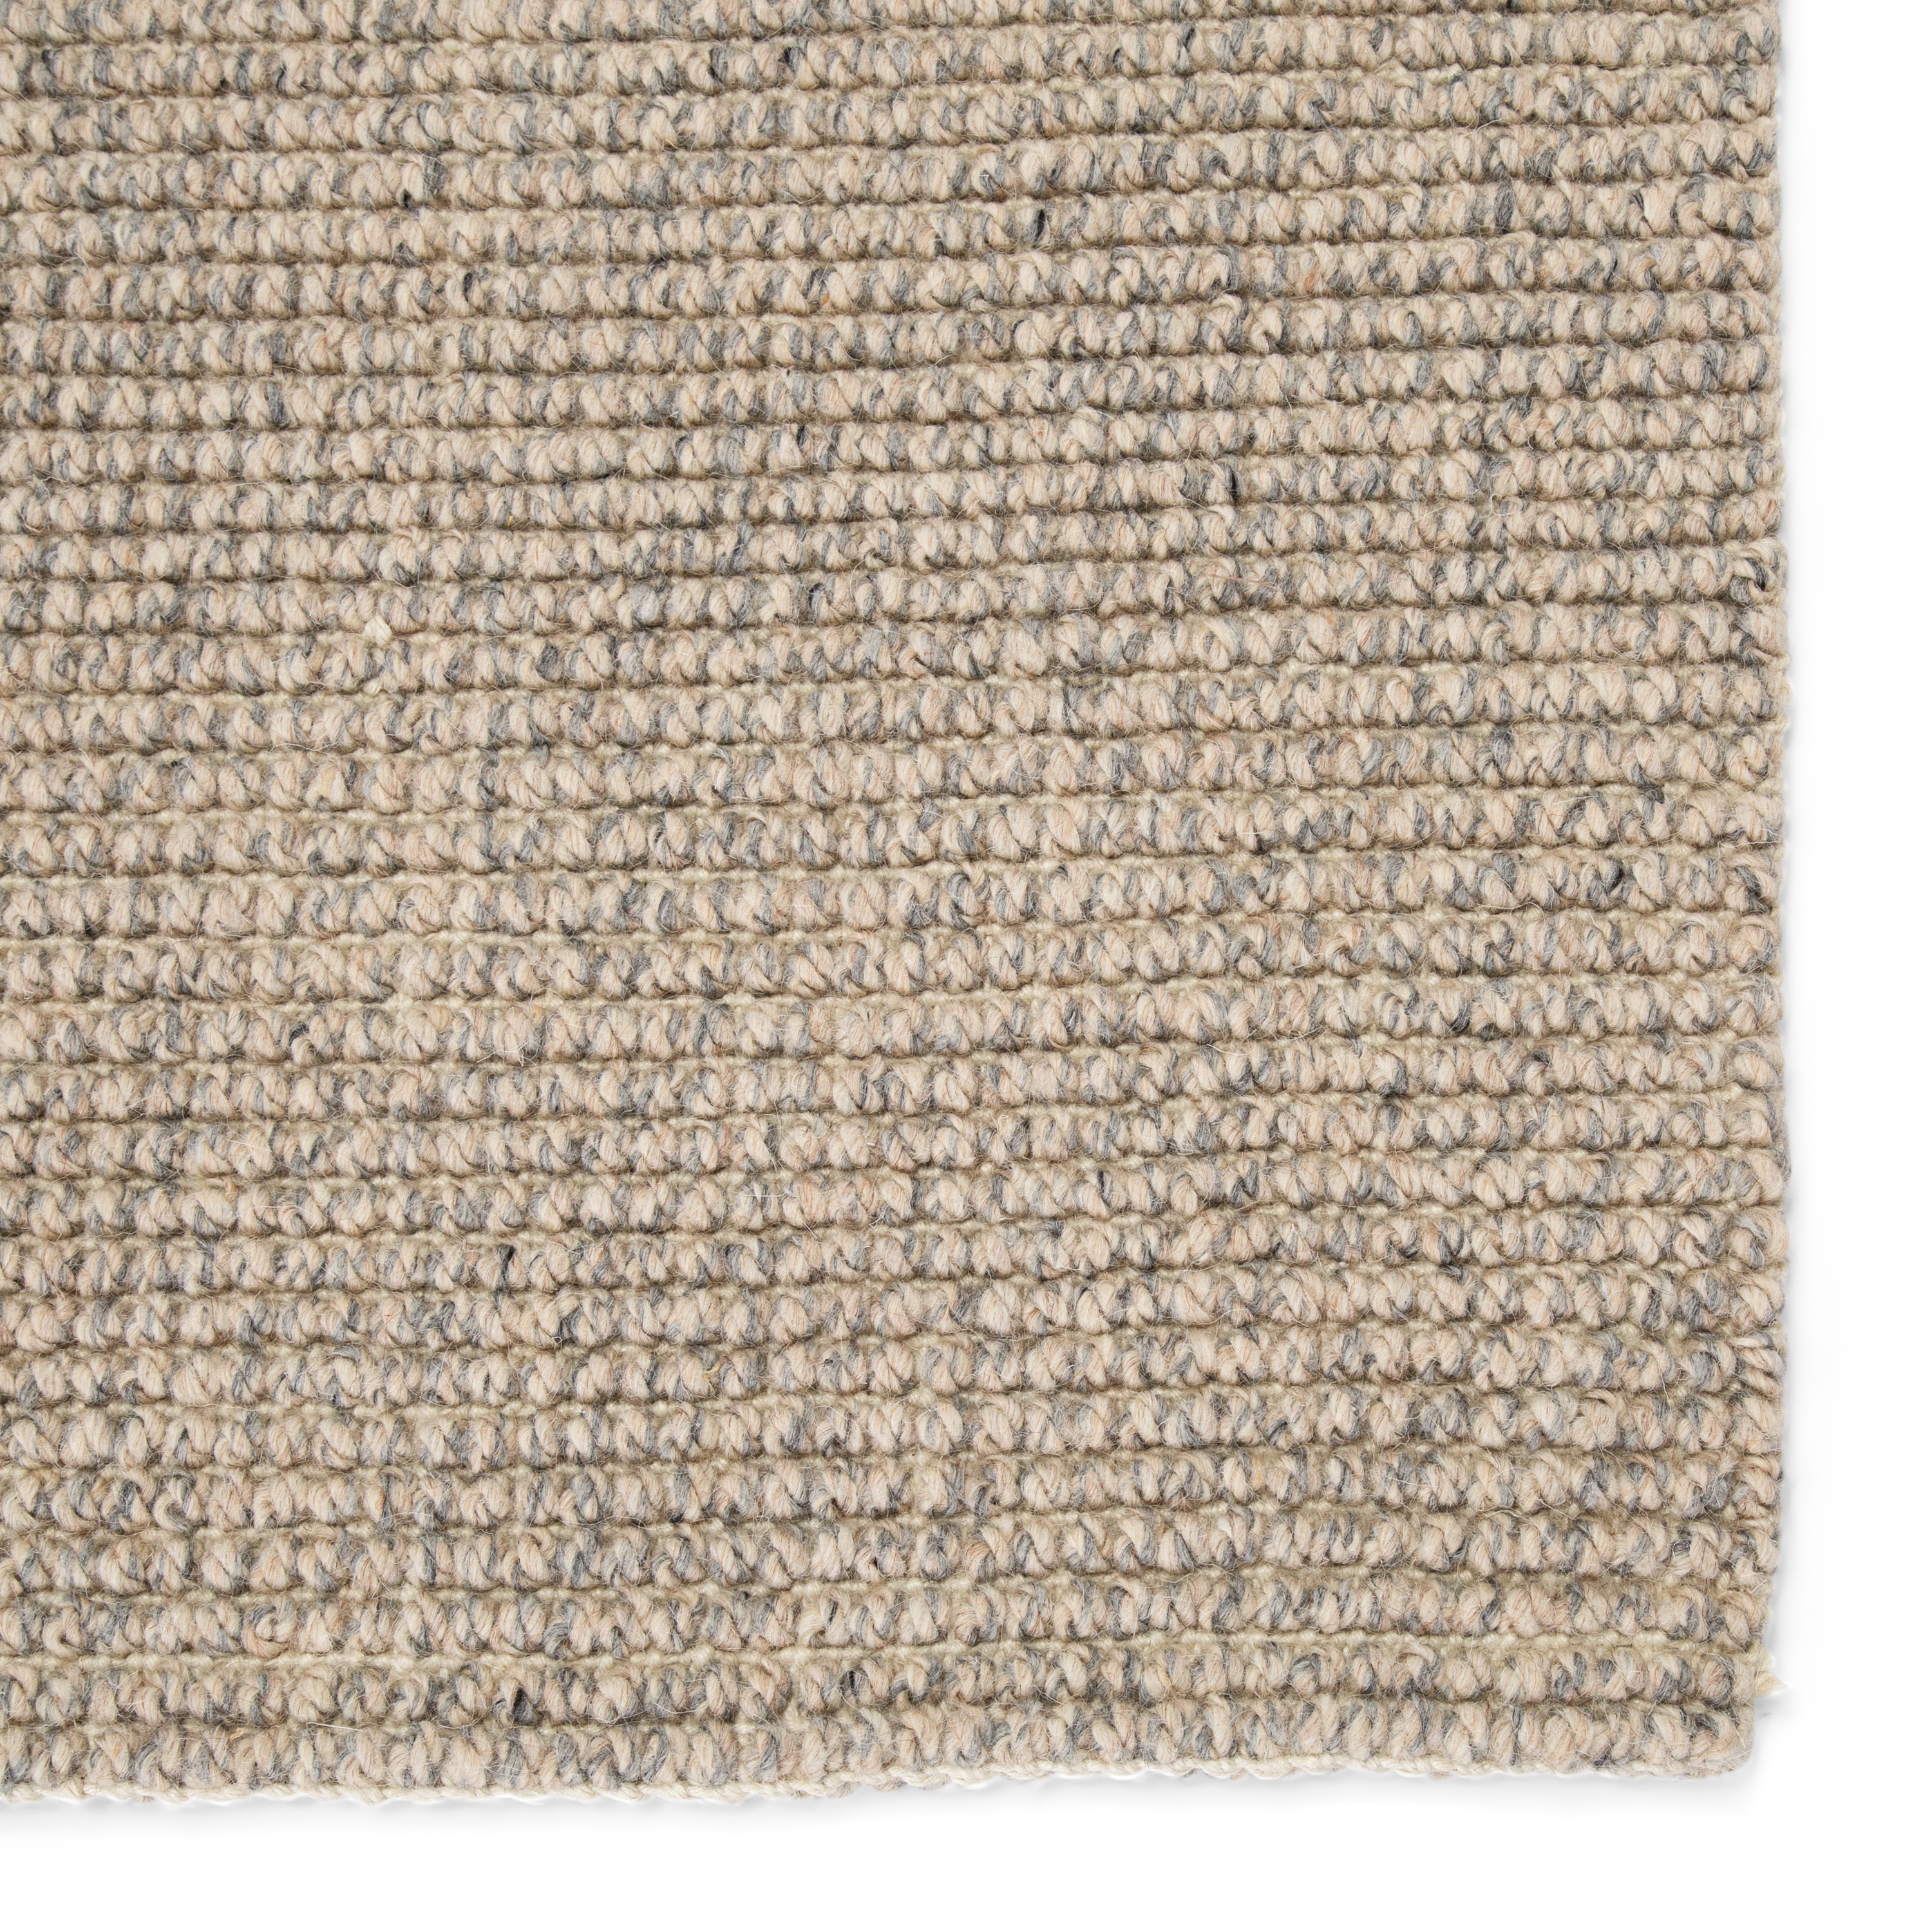 Chael Natural Solid Gray/ Beige Area Rug (9'X12') - Image 3